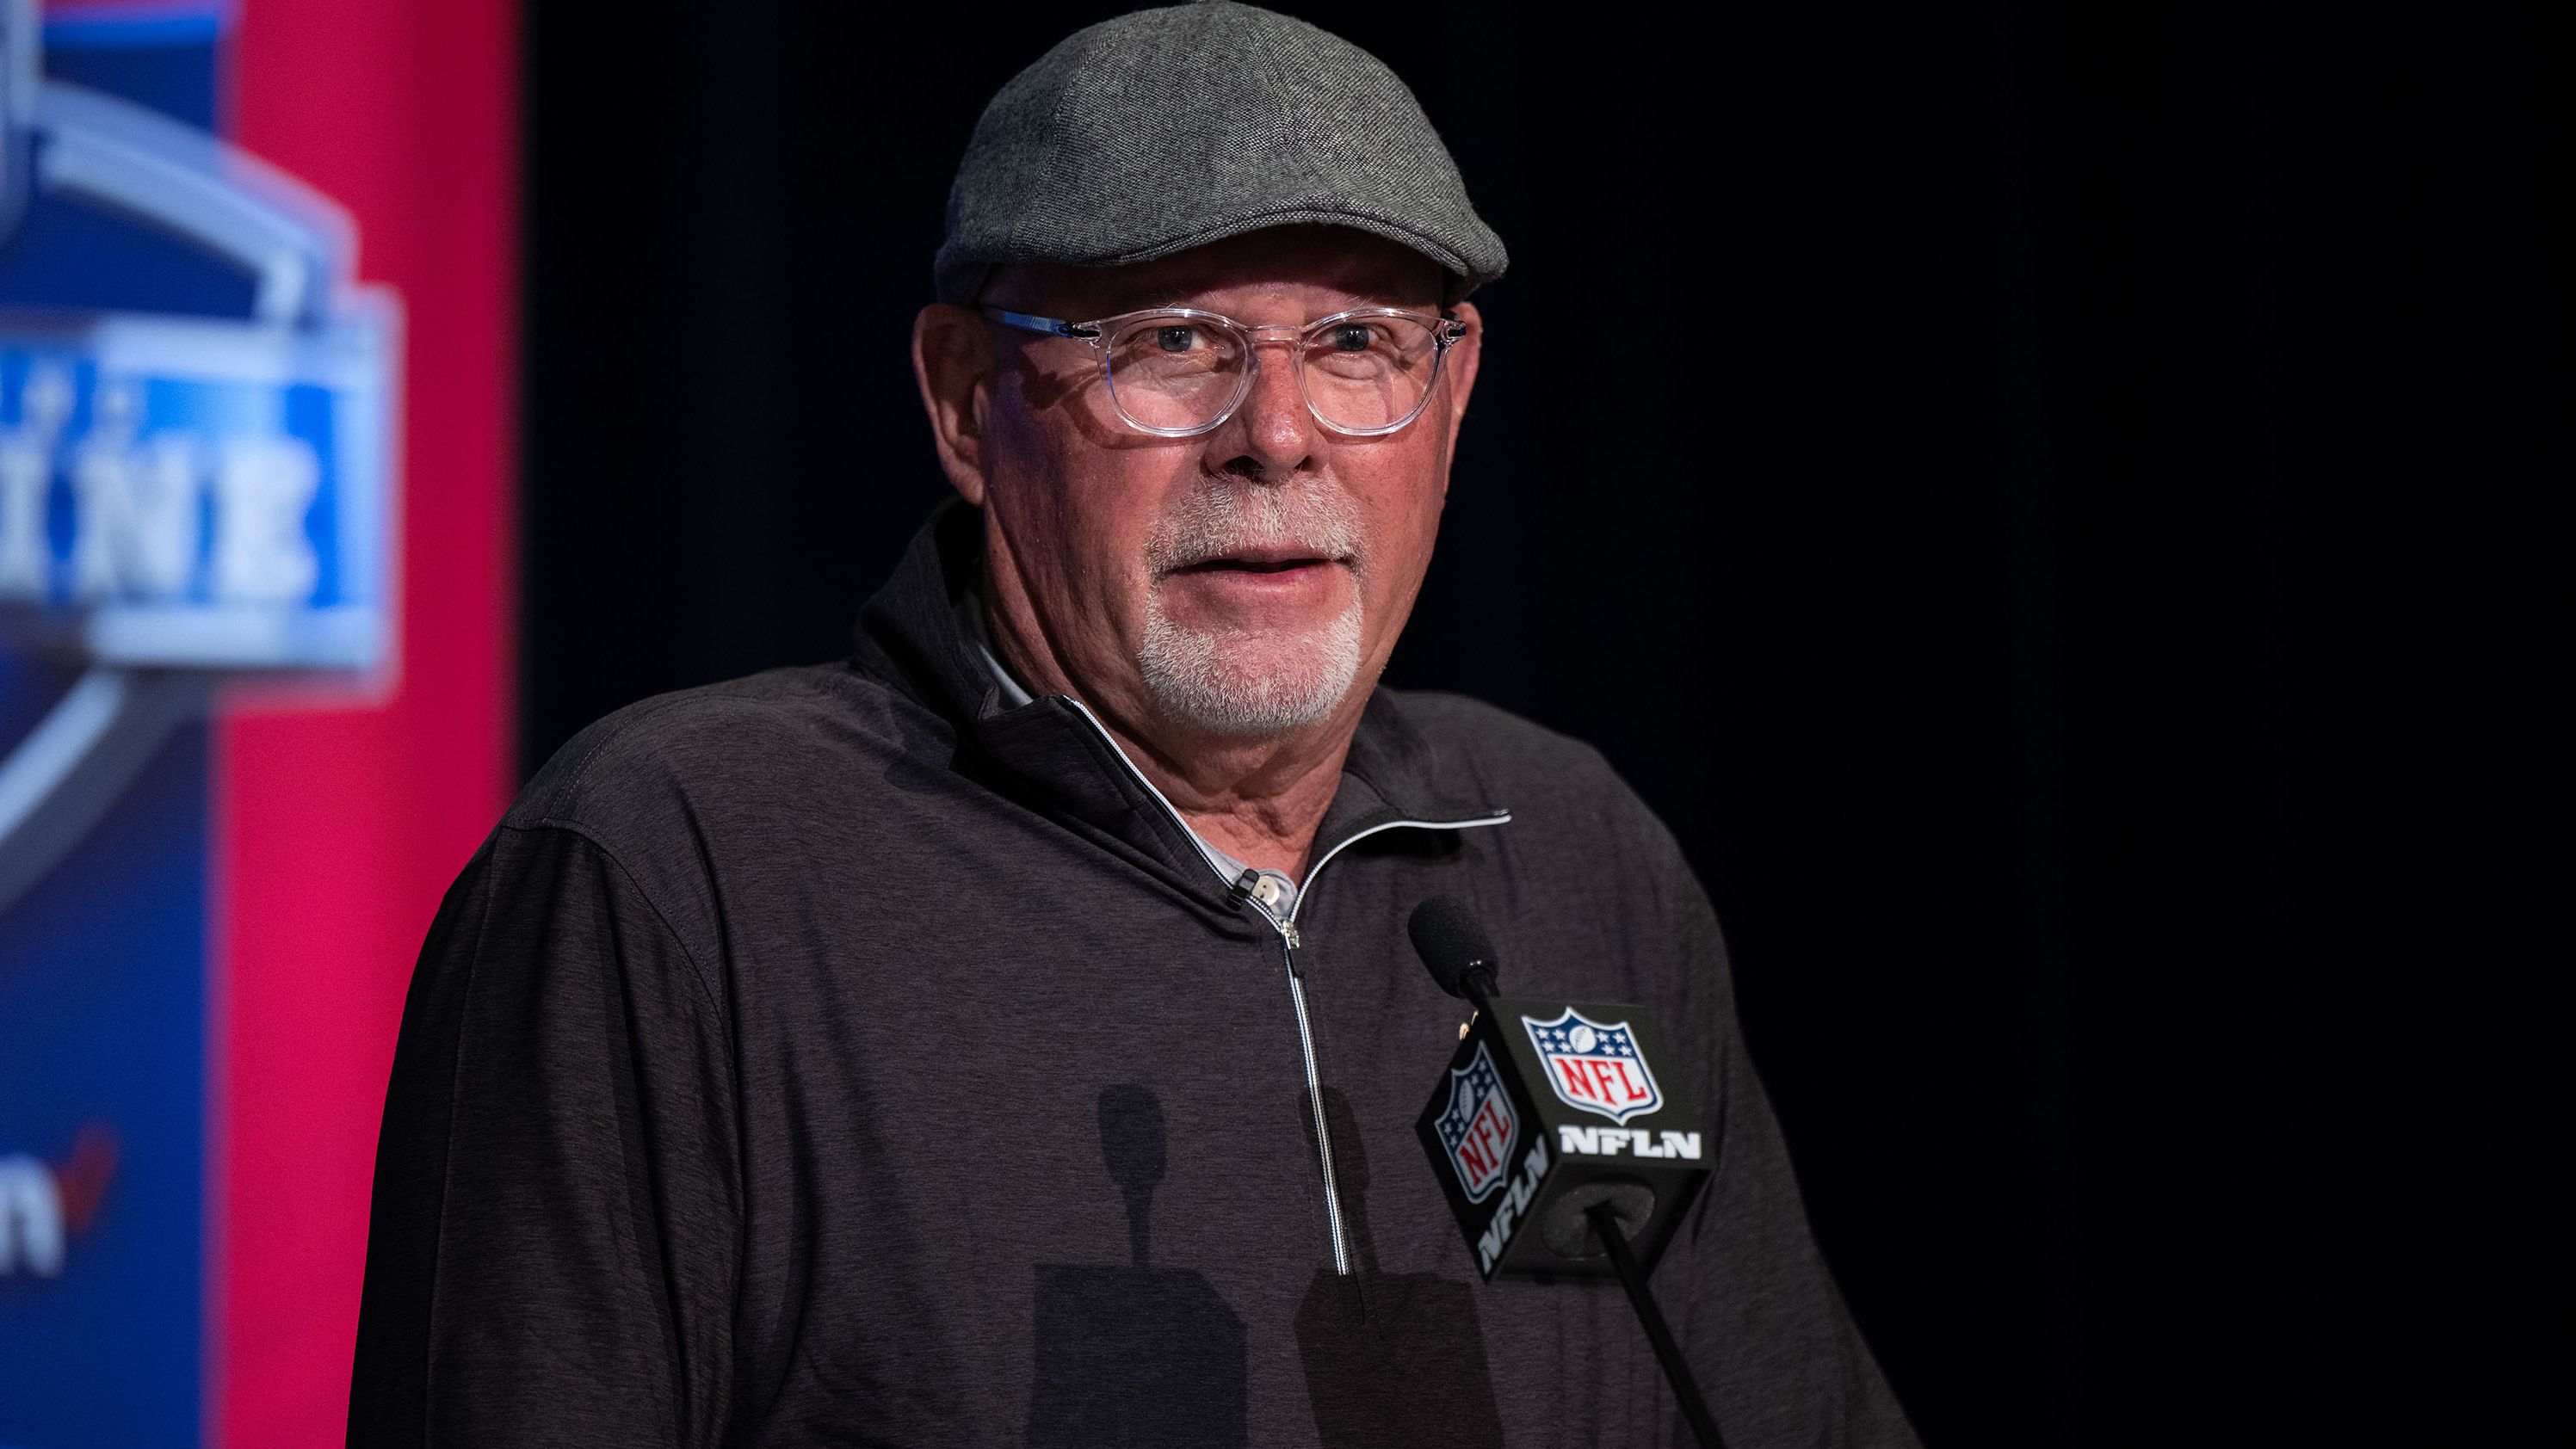 Bruce Arians: Tampa Bay Buccaneers head coach is stepping down and will  join the front office, team says | CNN